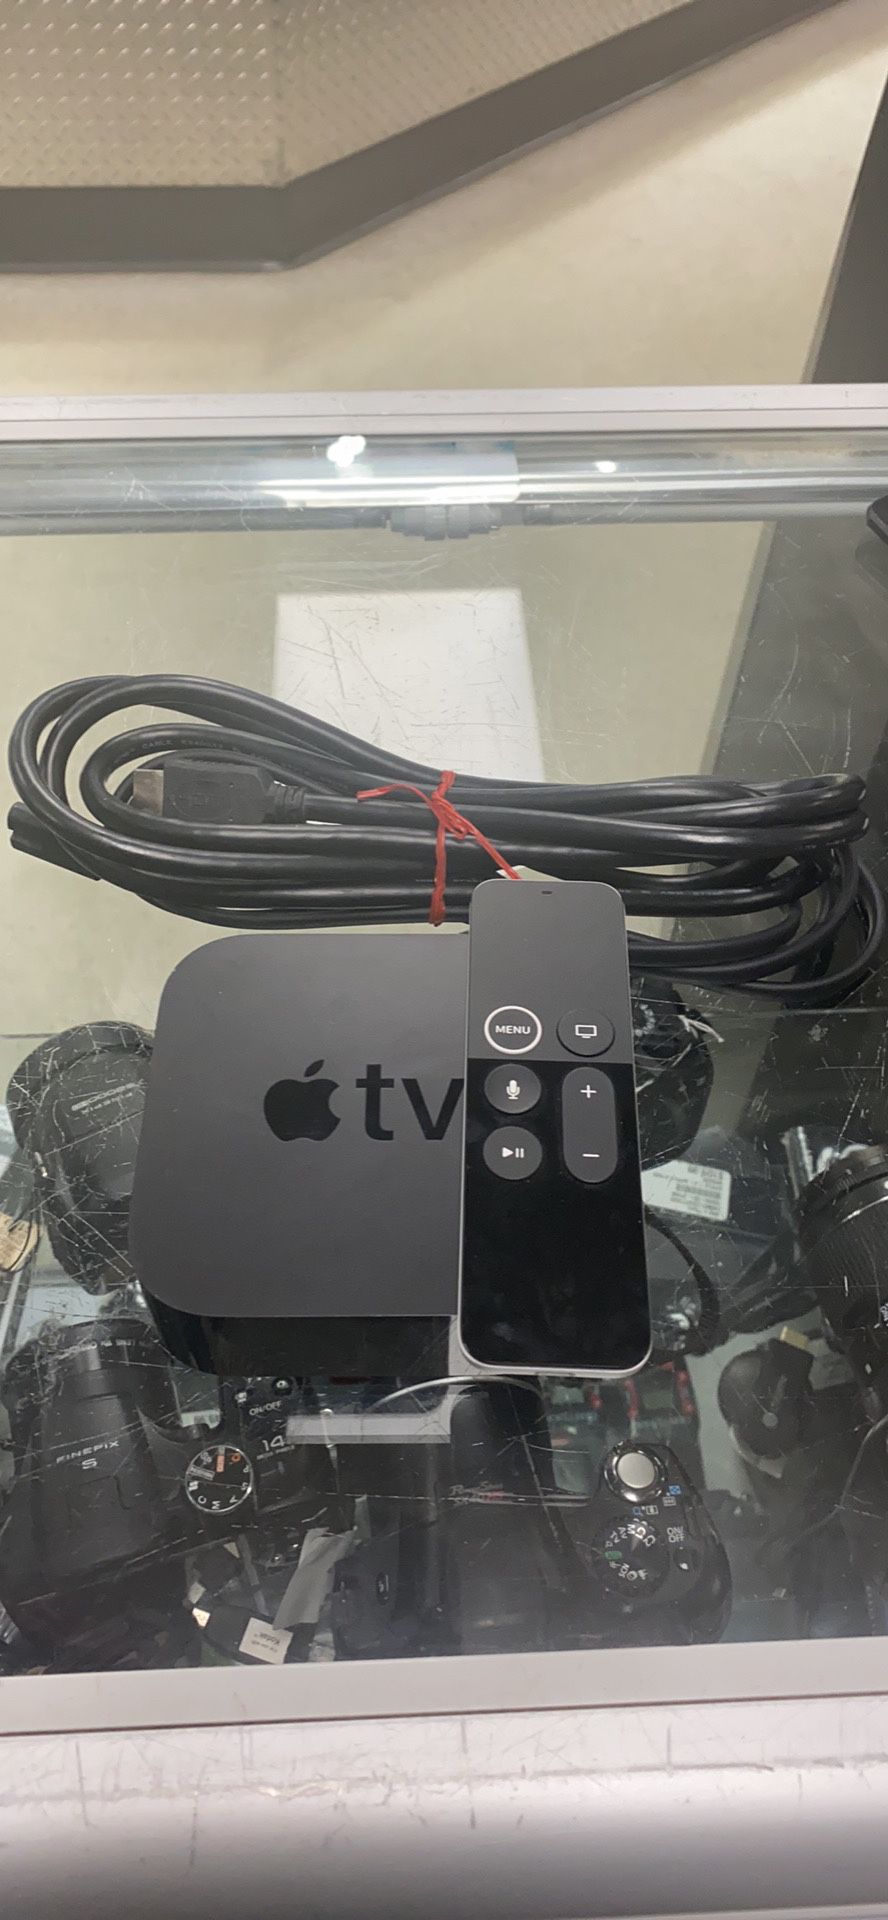 Apple TV 4th gen with remote and all cords